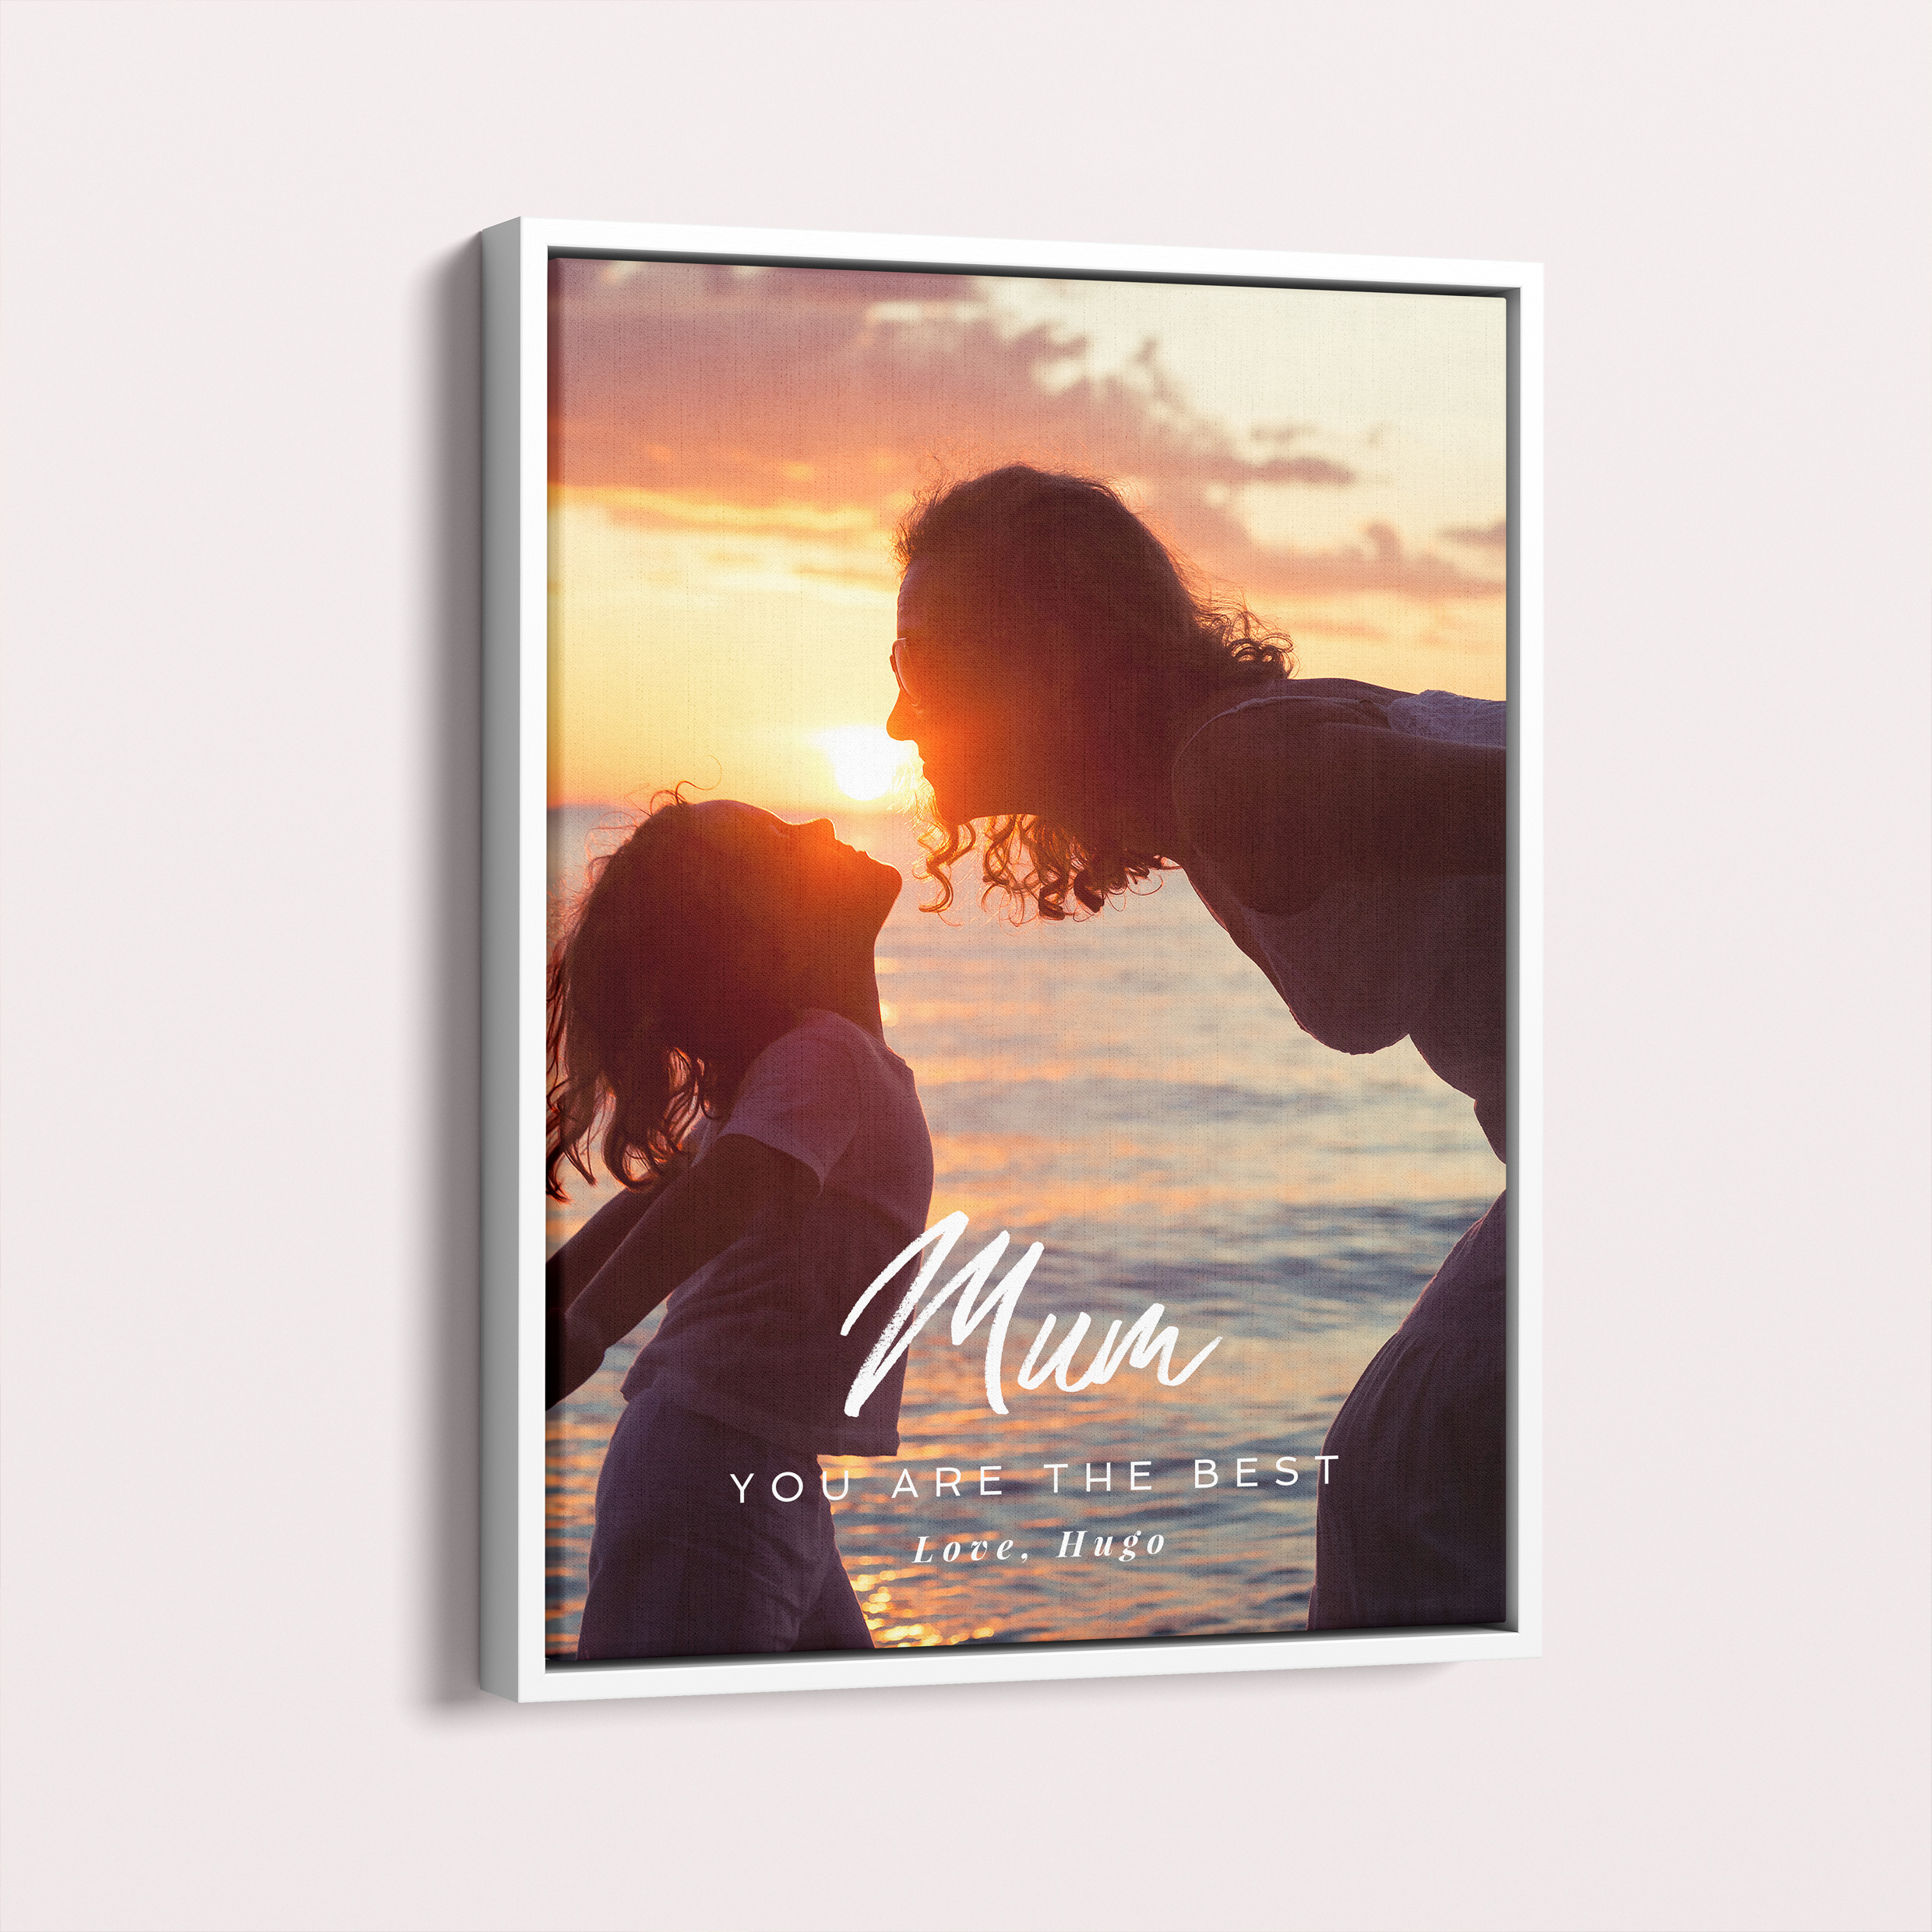 Personalised A Mother's Embrace Floater Frame Canvas - Capture the heartfelt joy in a single photo